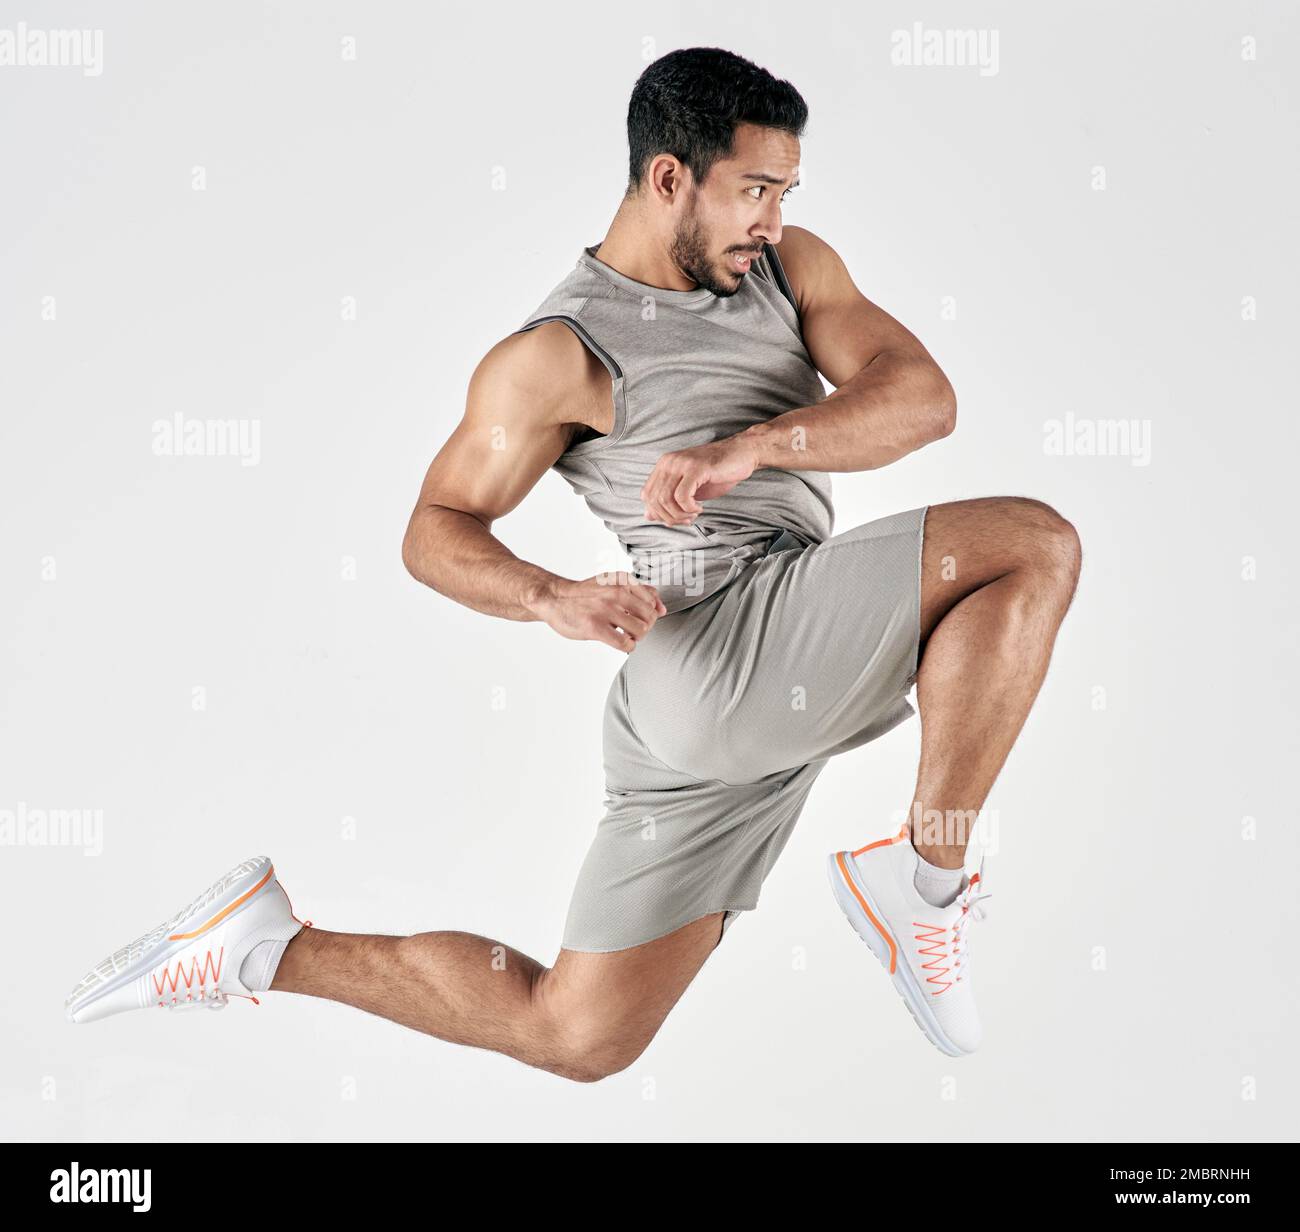 Turn pain into power, and power into growth. Studio shot of a muscular young man jumping against a white background. Stock Photo